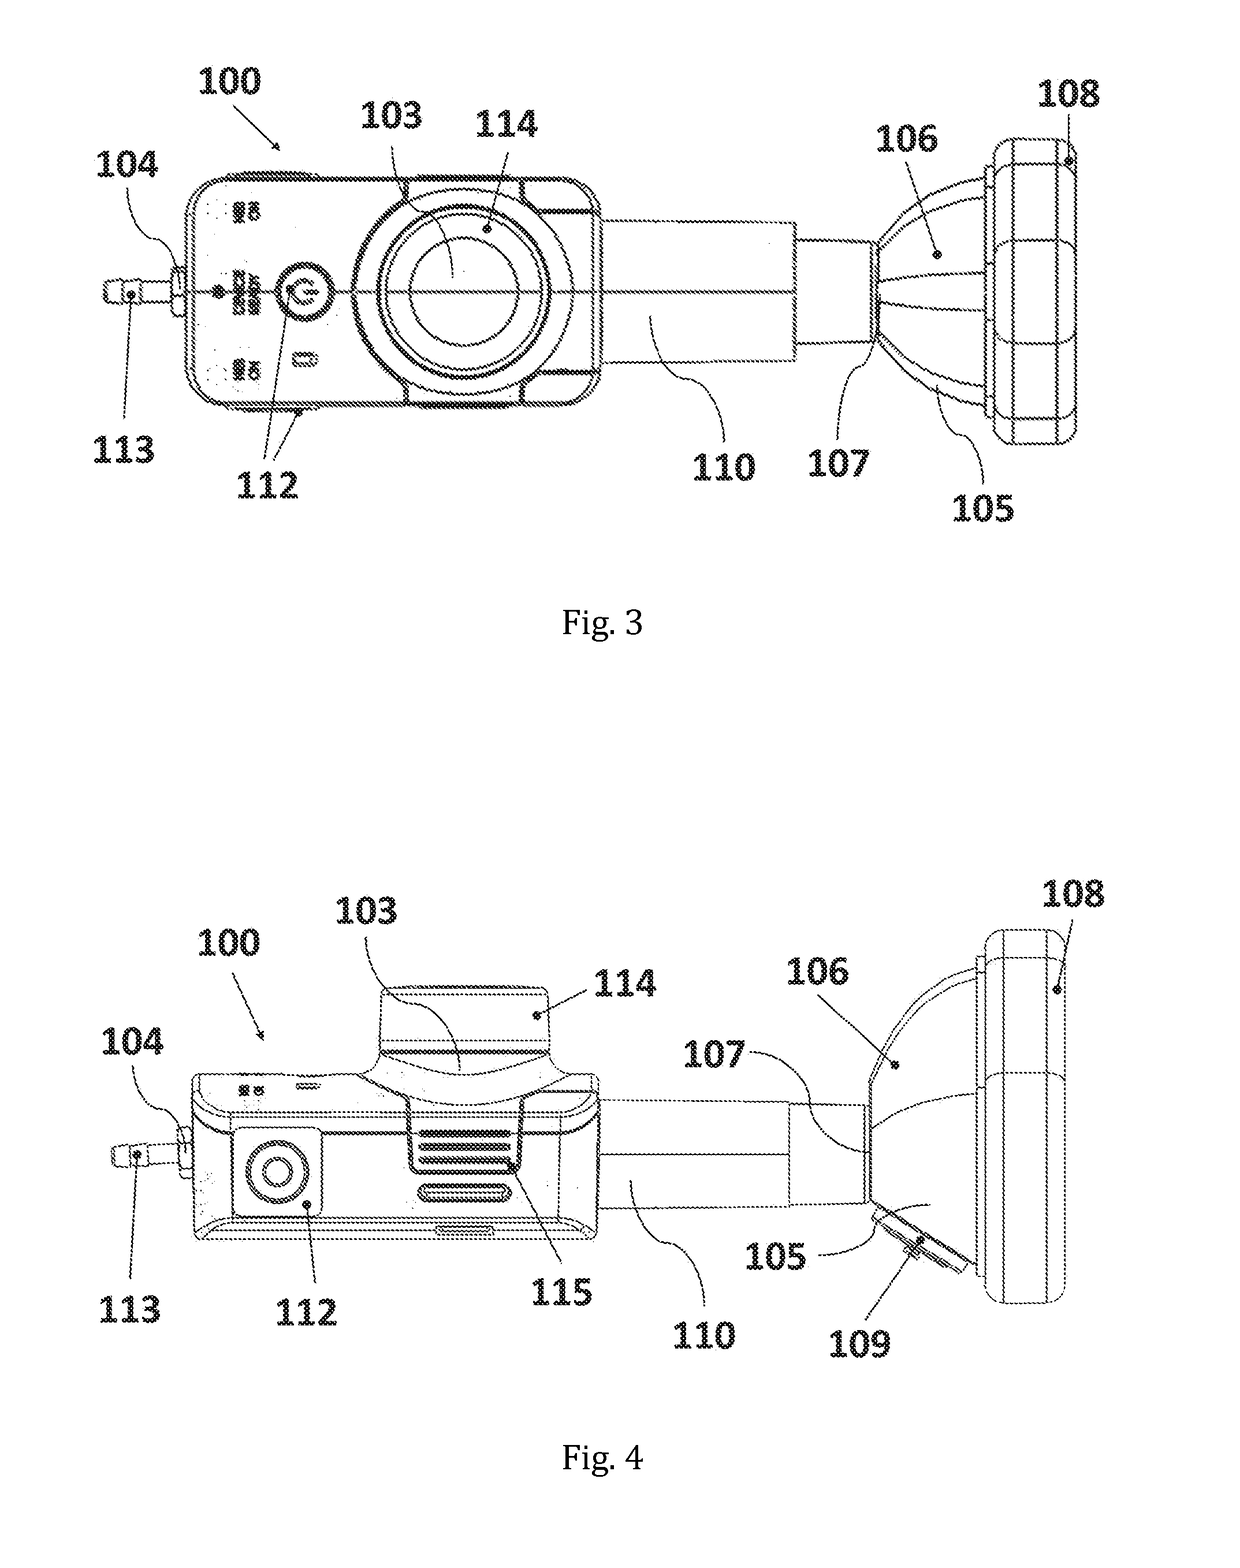 Inhalation device for use in aerosol therapy of respiratory diseases